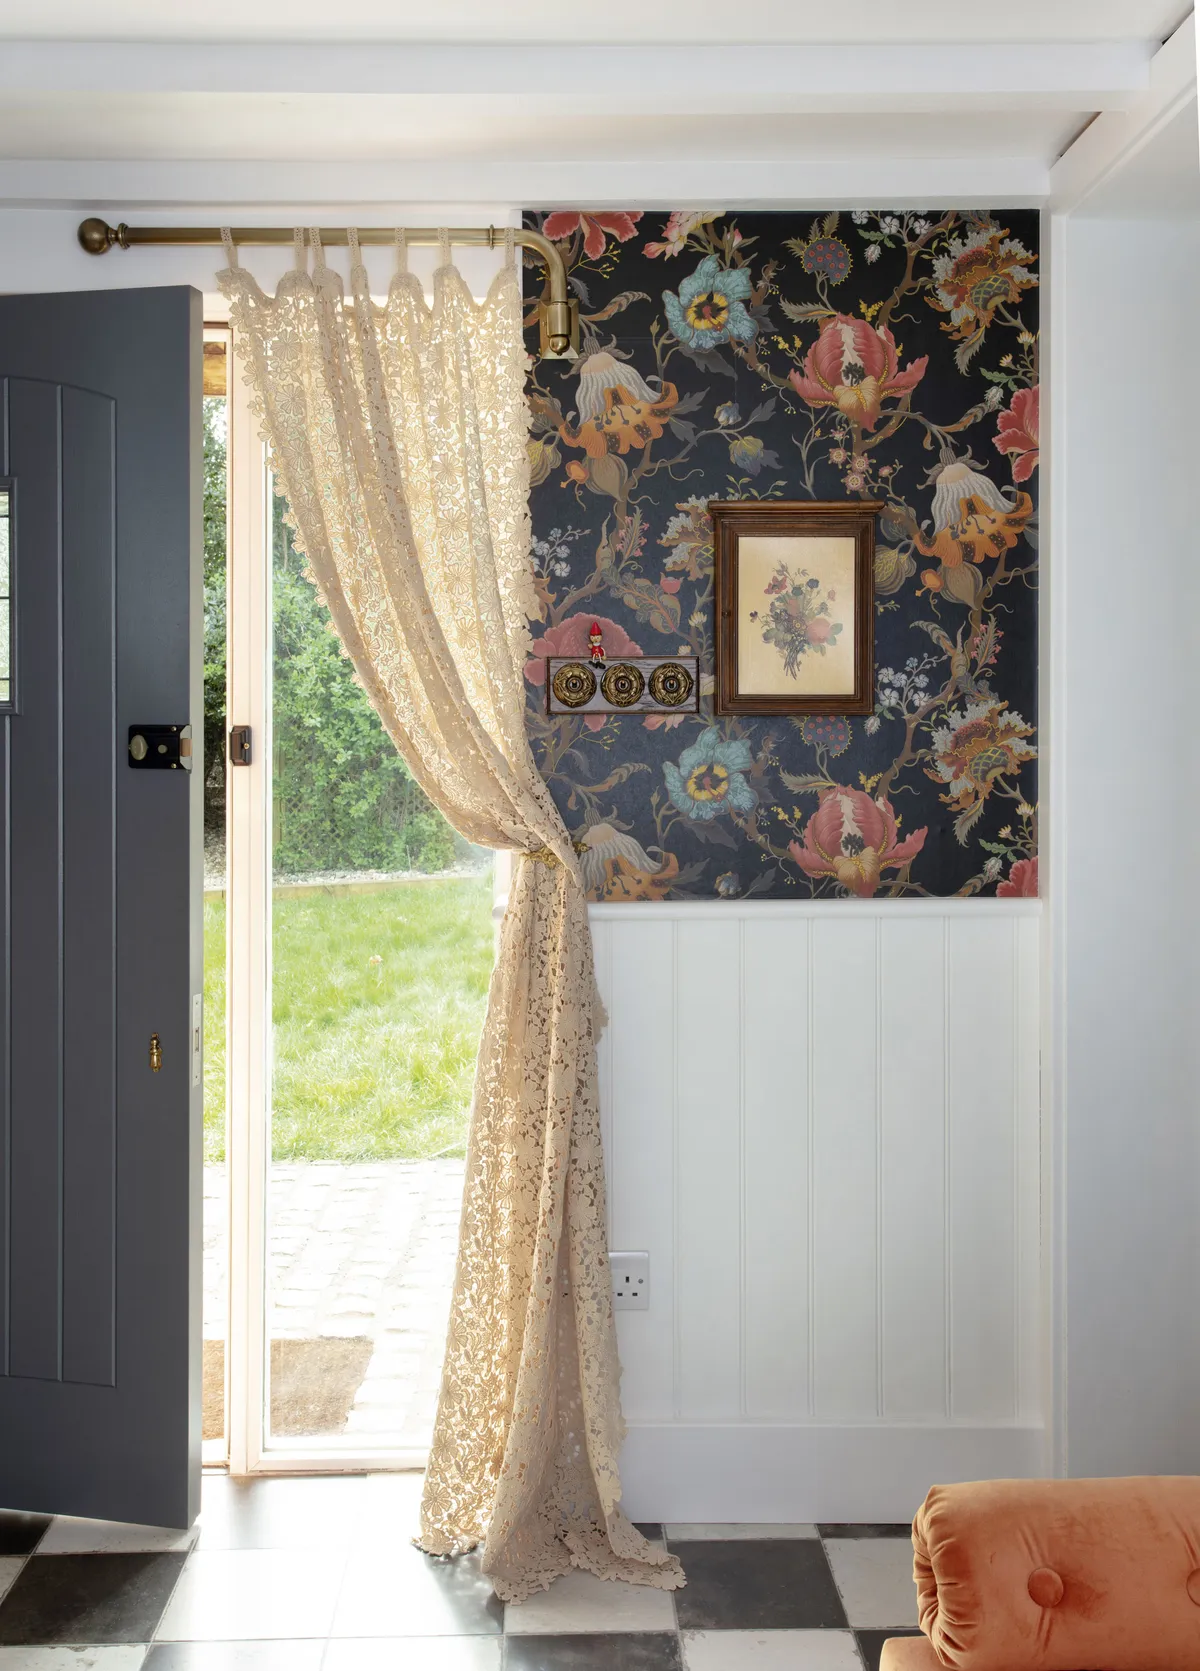 Good idea! If you can’t find the shade and style of soft furnishings you like, think about changing them yourself. Sabrina bought a length of white lace curtain and dyed it a warmer cream by immersing it in a tea solution for a vintage feel